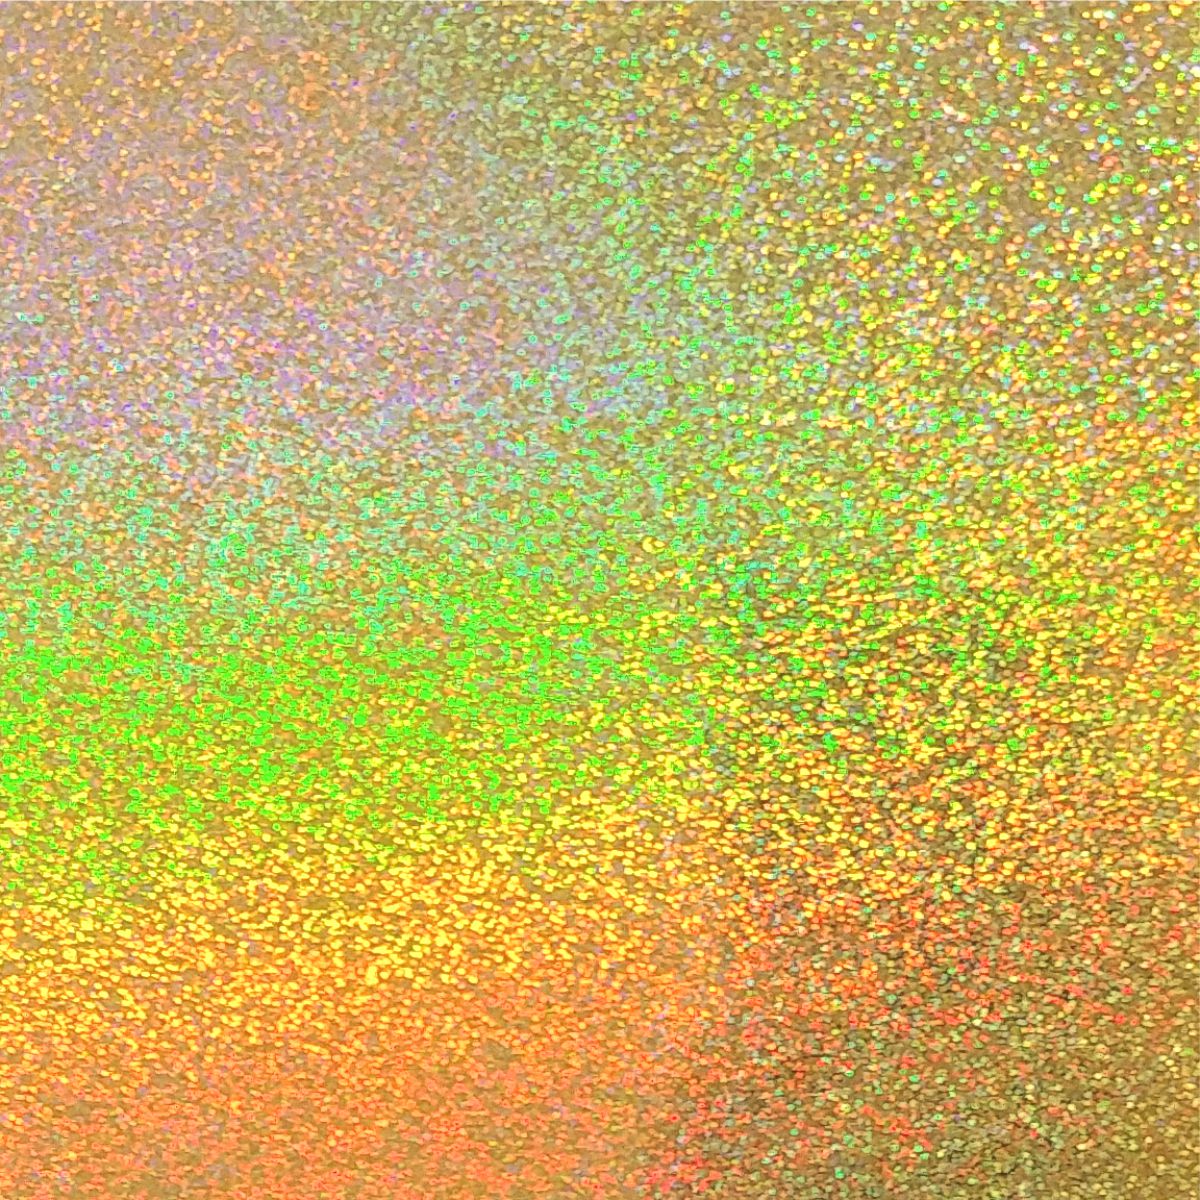 Gold Holographic Sparkle Adhesive Vinyl Rolls By Craftables